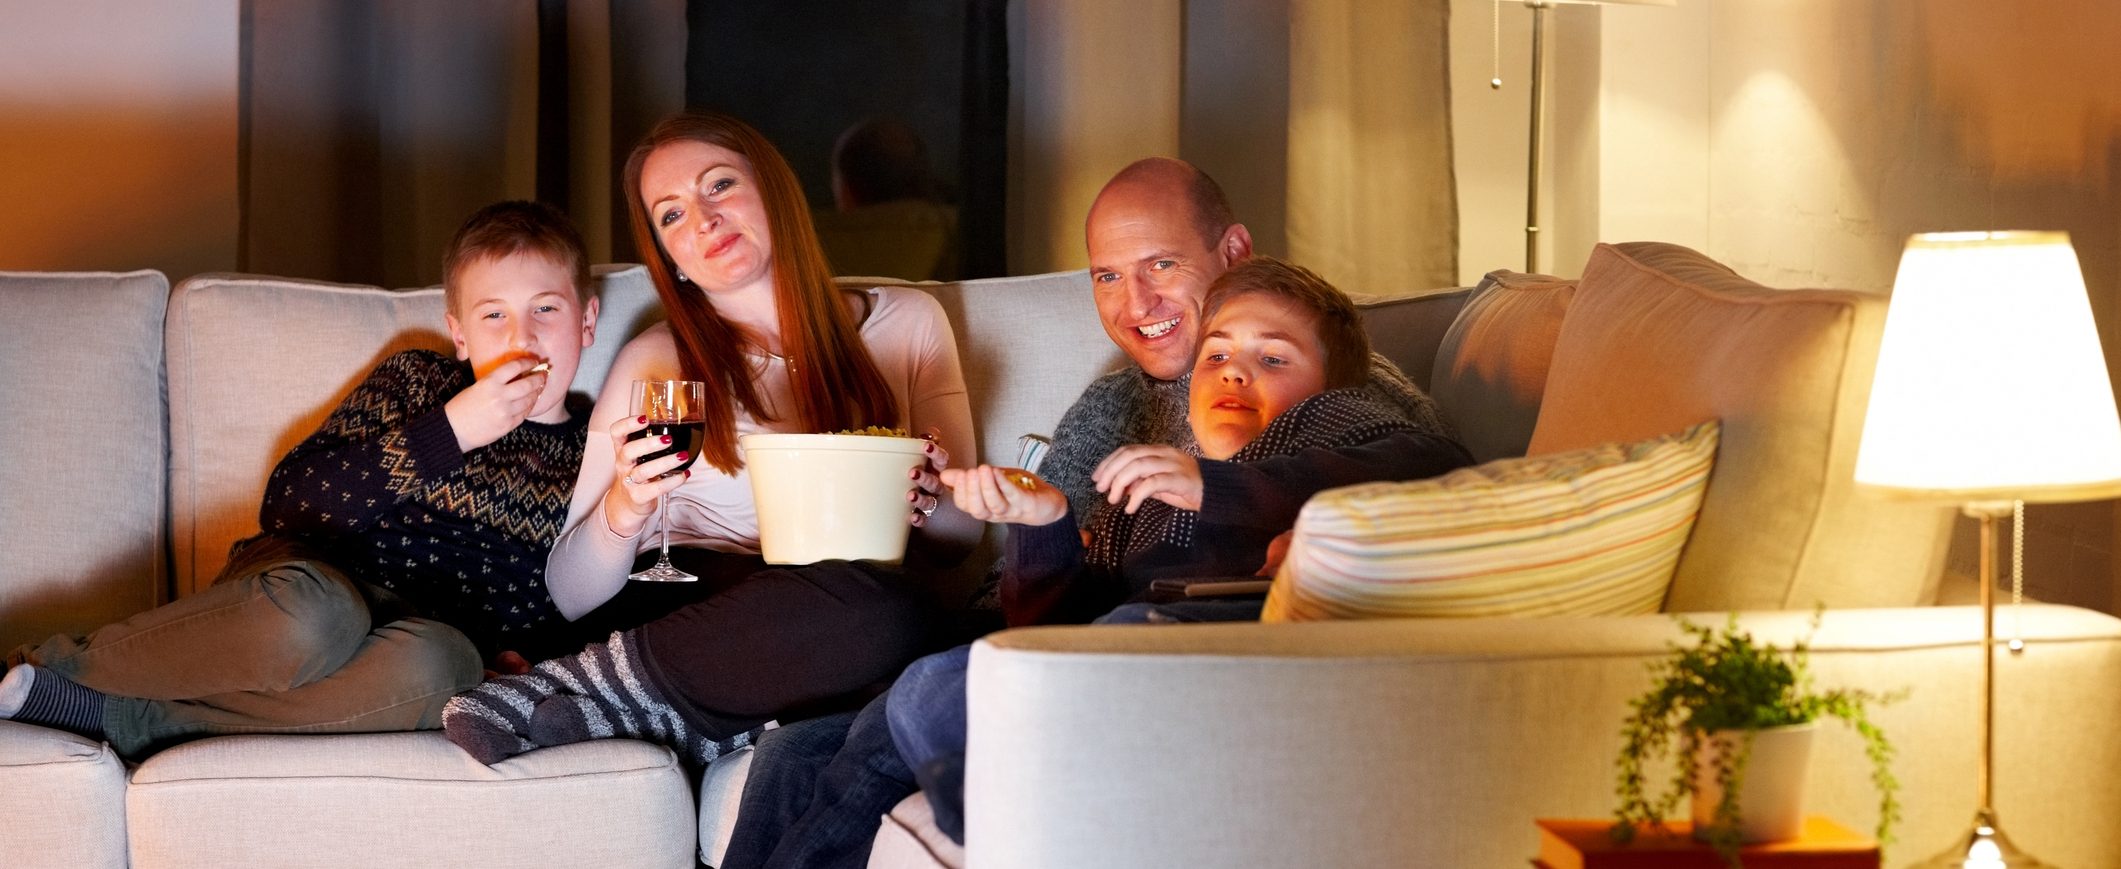 A family enjoys an evening at home rather than spending extravagantly on entertainment